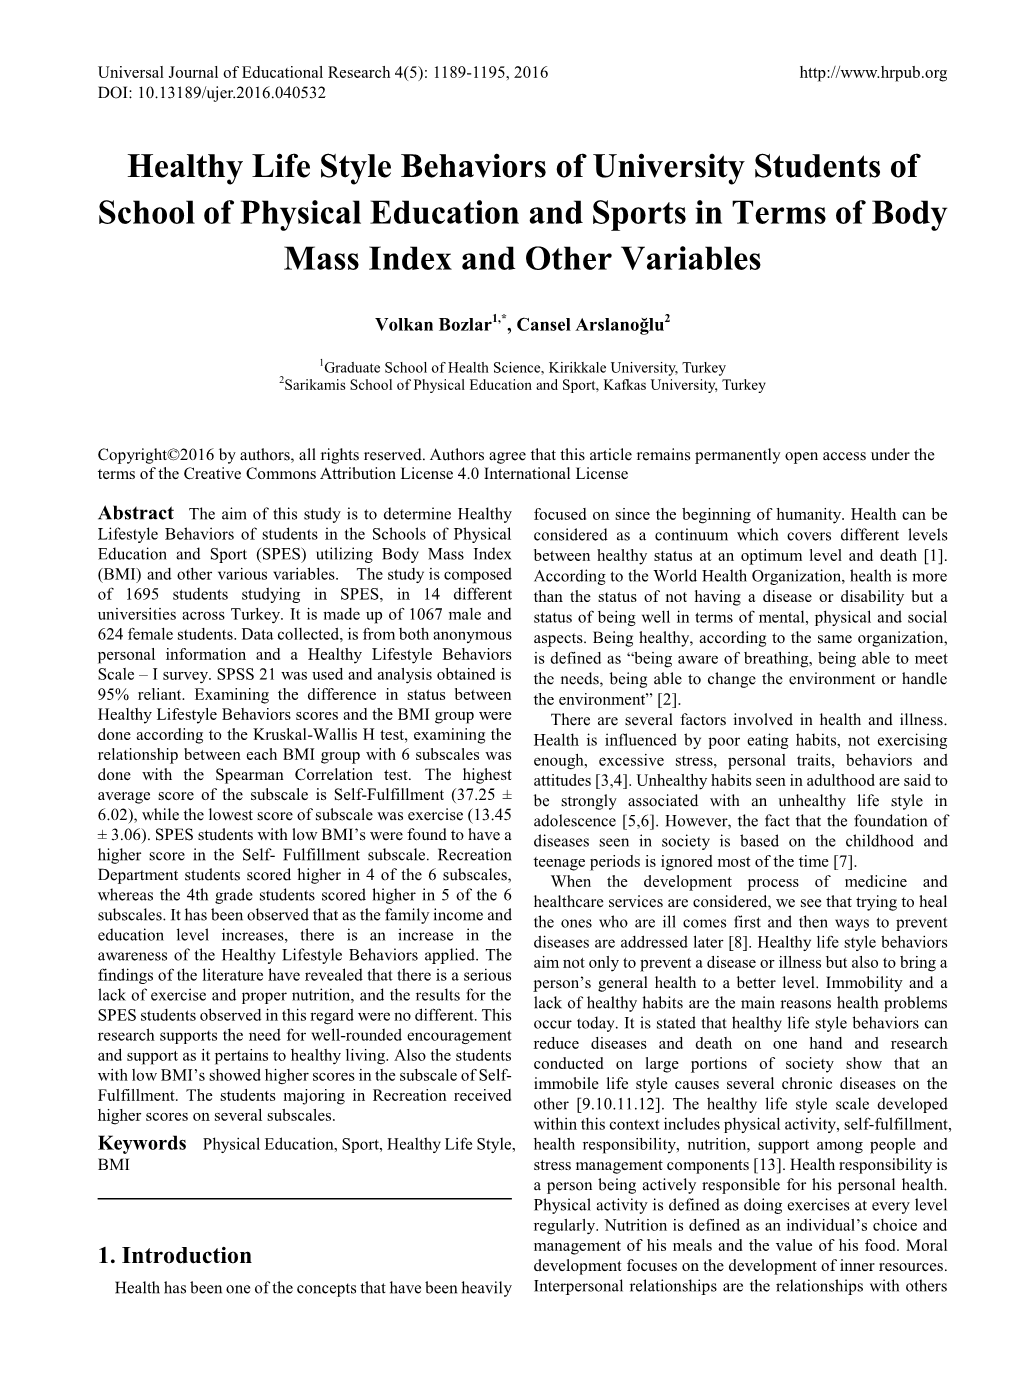 Healthy Life Style Behaviors of University Students of School of Physical Education and Sports in Terms of Body Mass Index and Other Variables